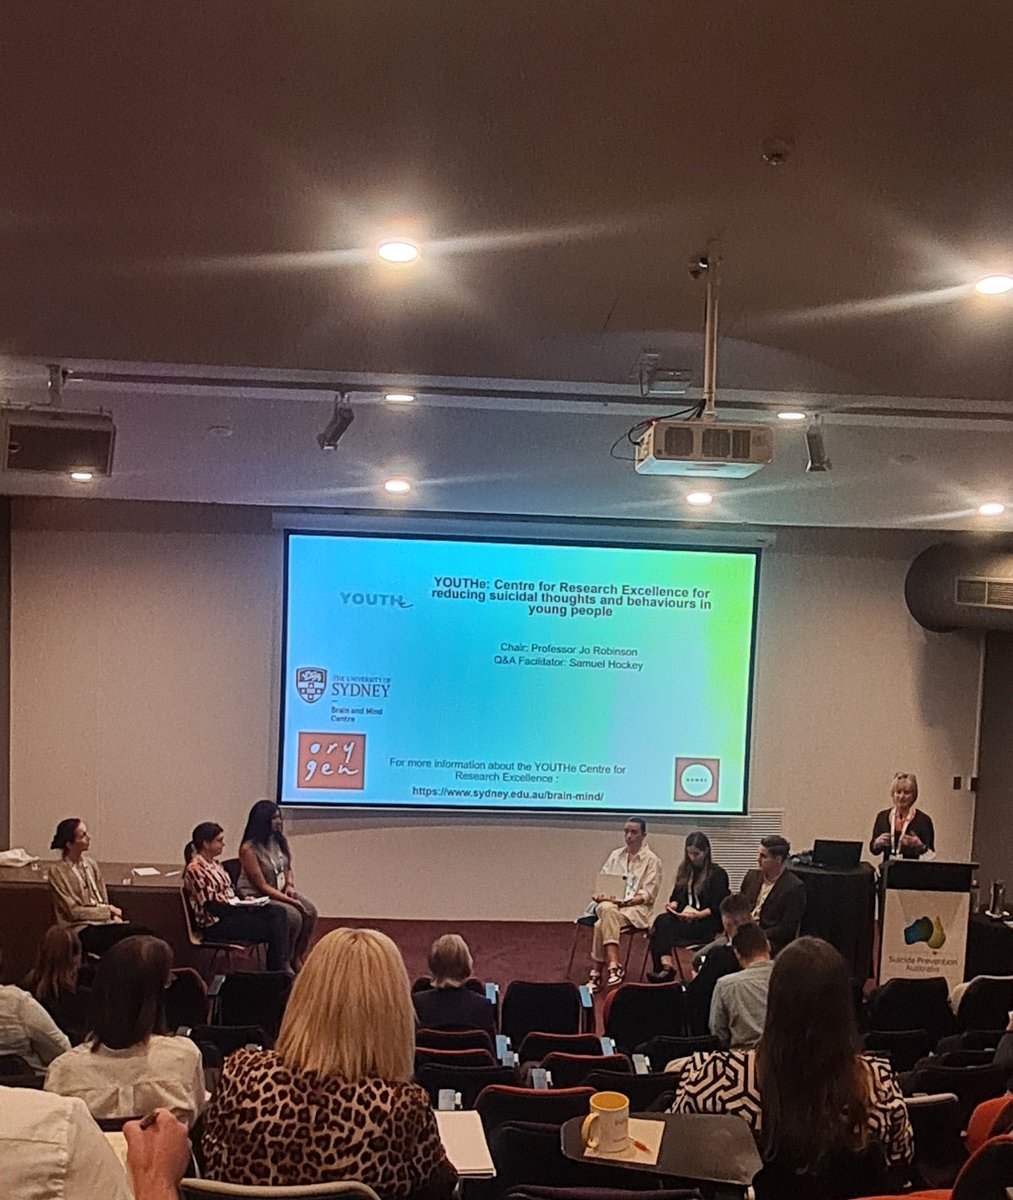 #NSPC23 starting now: @YOUTHe_au symposium on improving access to and quality of clinical care in #SuicidePrevention for #YoungPeople. Focus on big data, novel methods and lived experience.